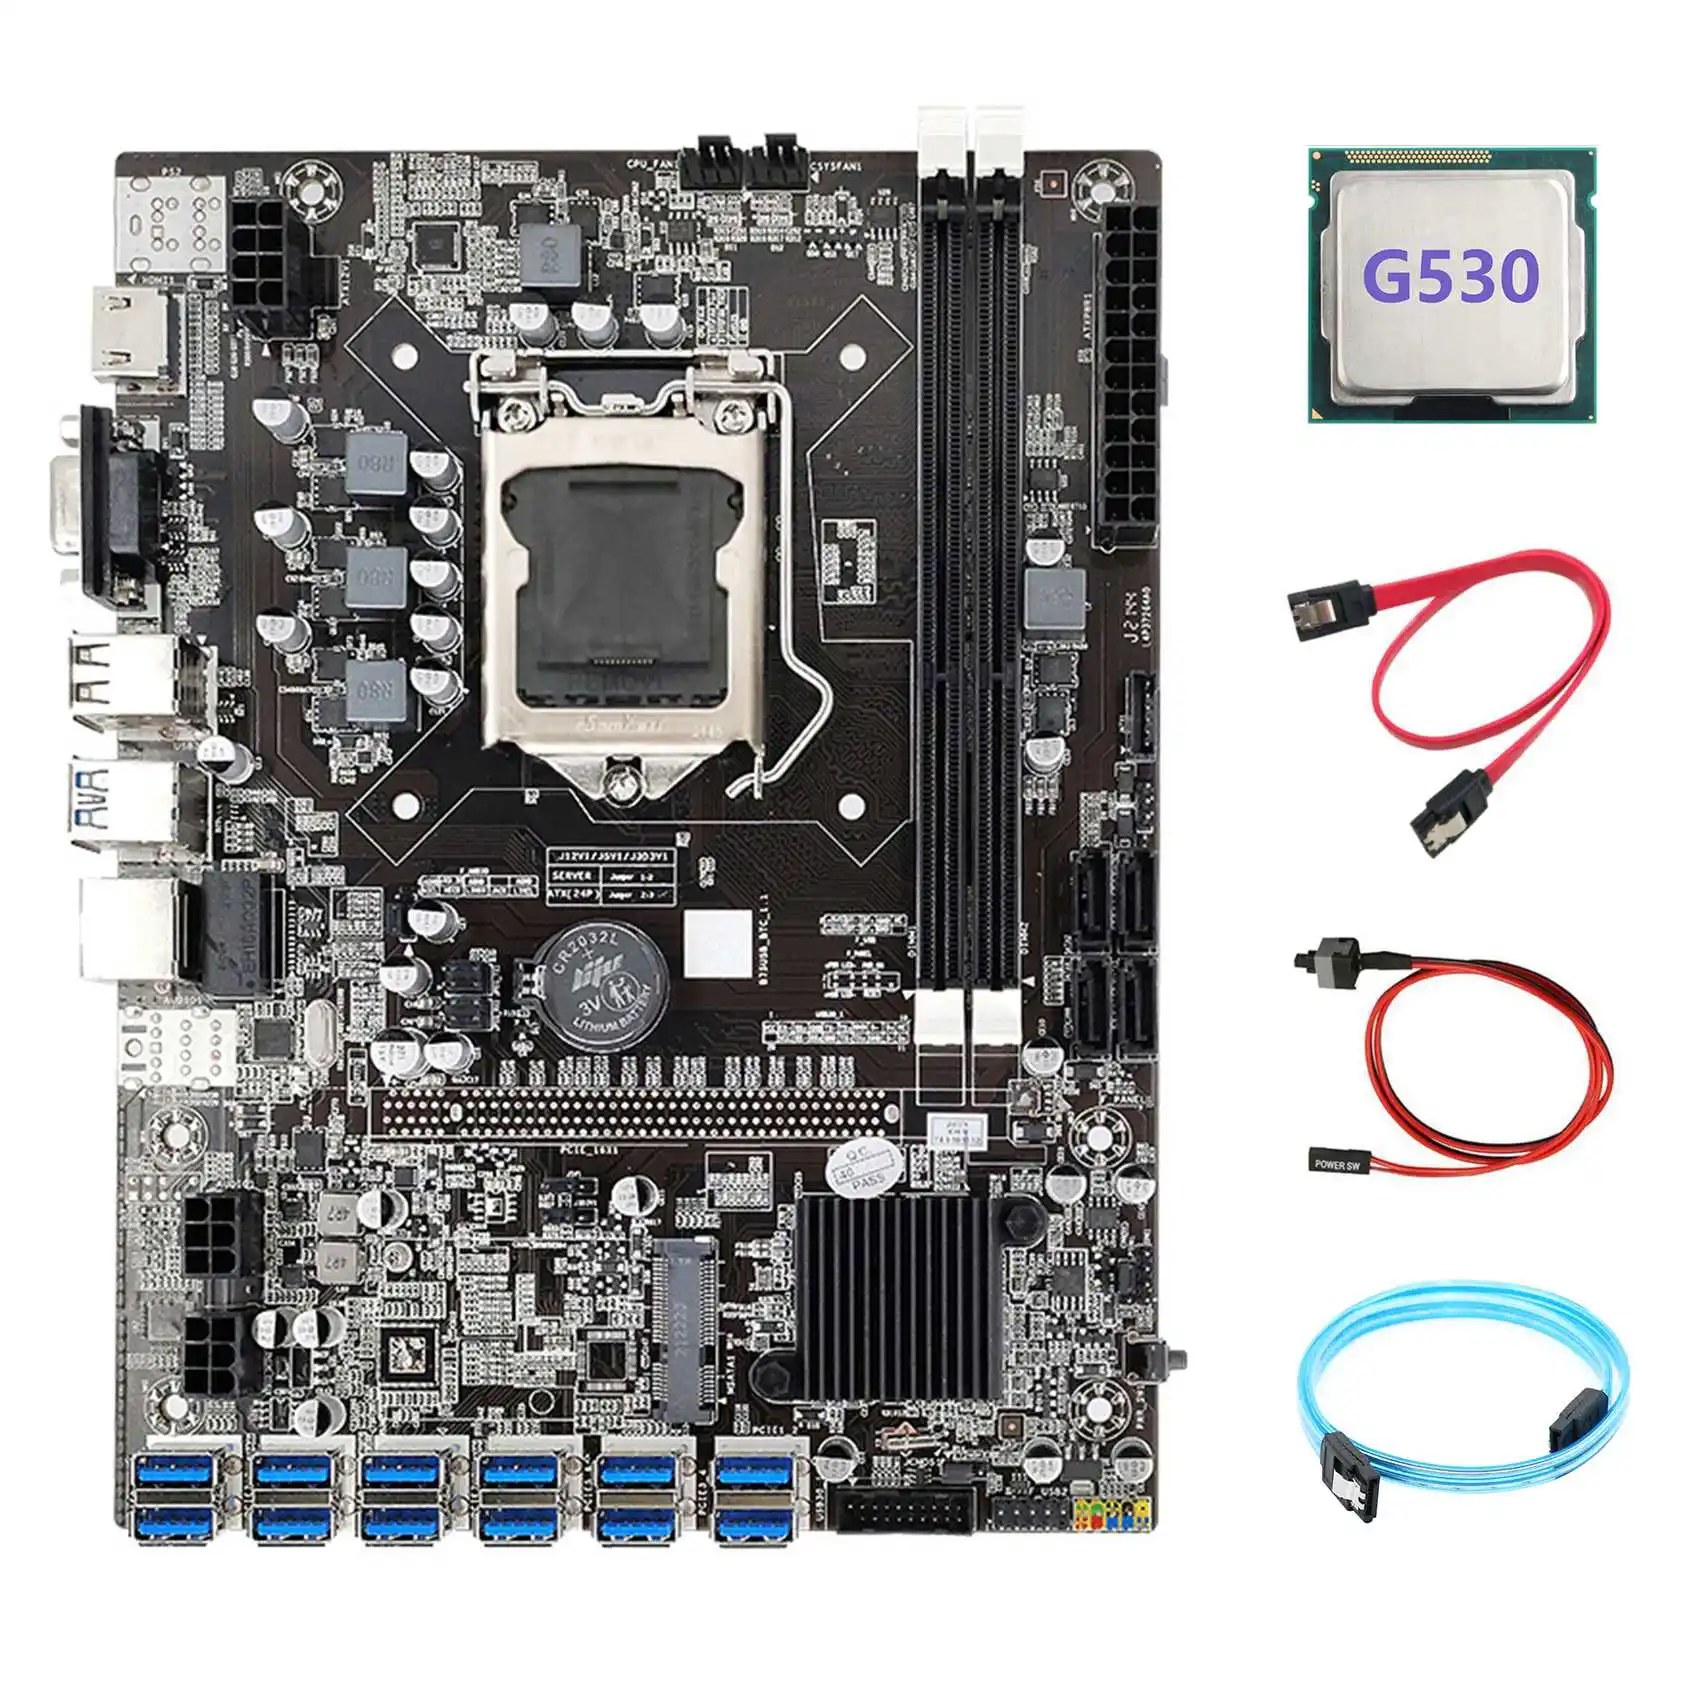 B75 ETH Miner Motherboard 12 PCIE to USB+G530 CPU+SATA3.0 Serial Port Cable+SATA Cable+Switch Cable LGA1155 Motherboard